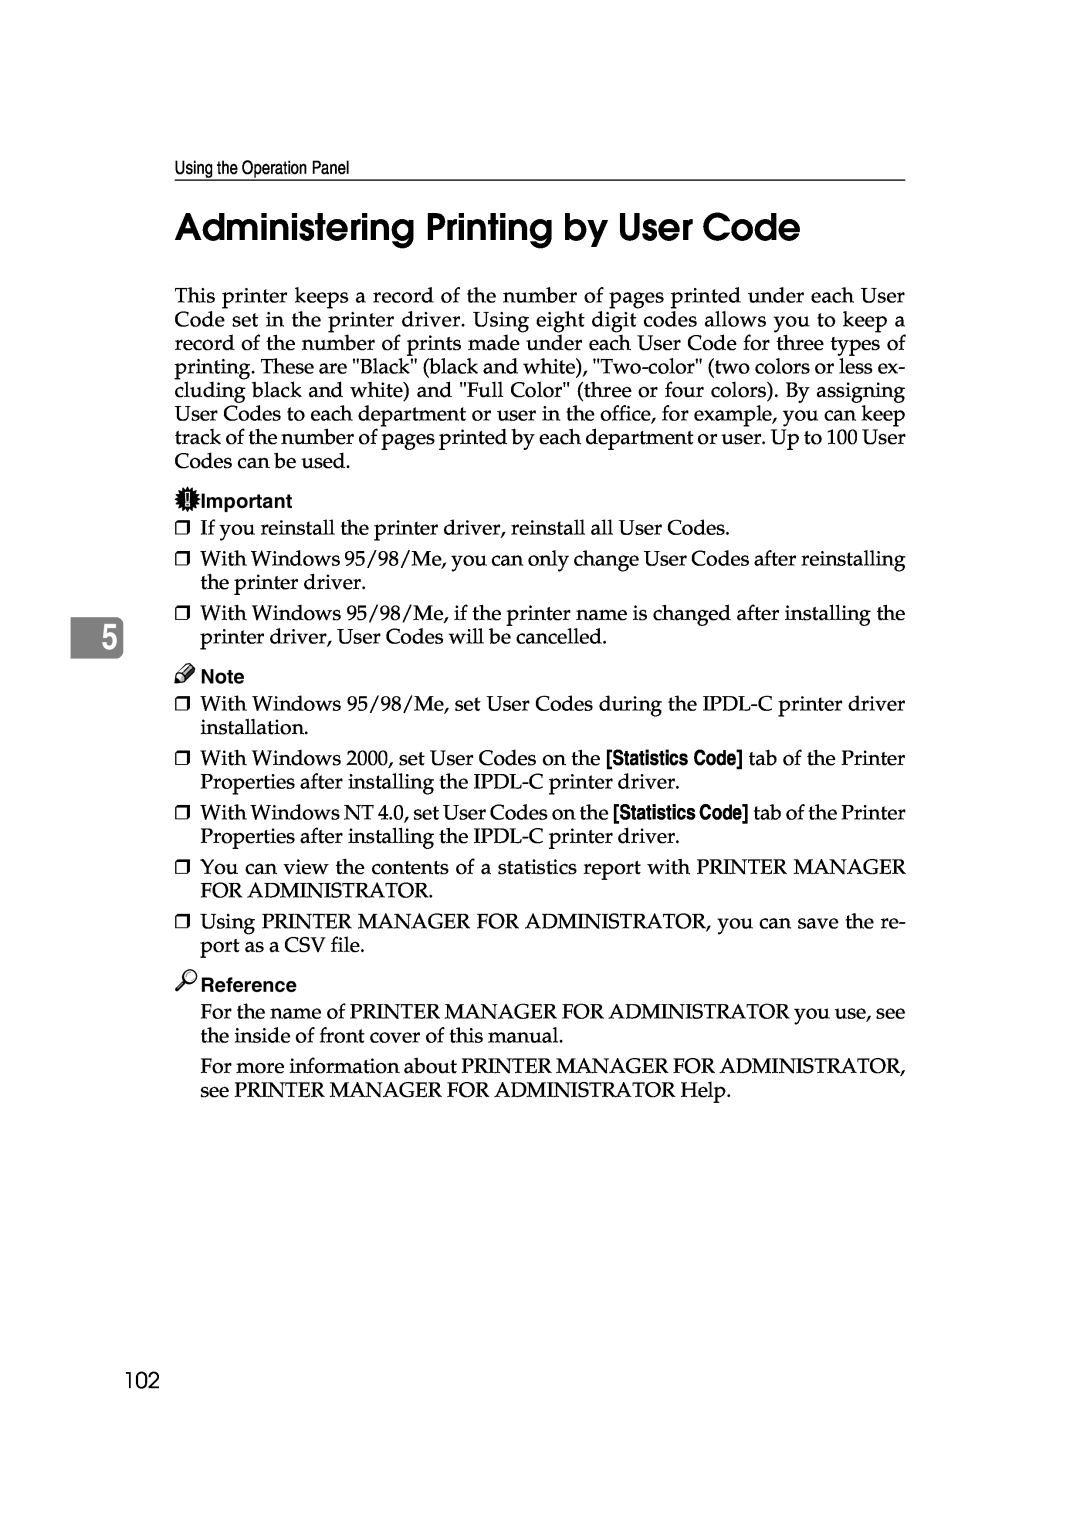 Lanier AP206 manual Administering Printing by User Code, Reference 